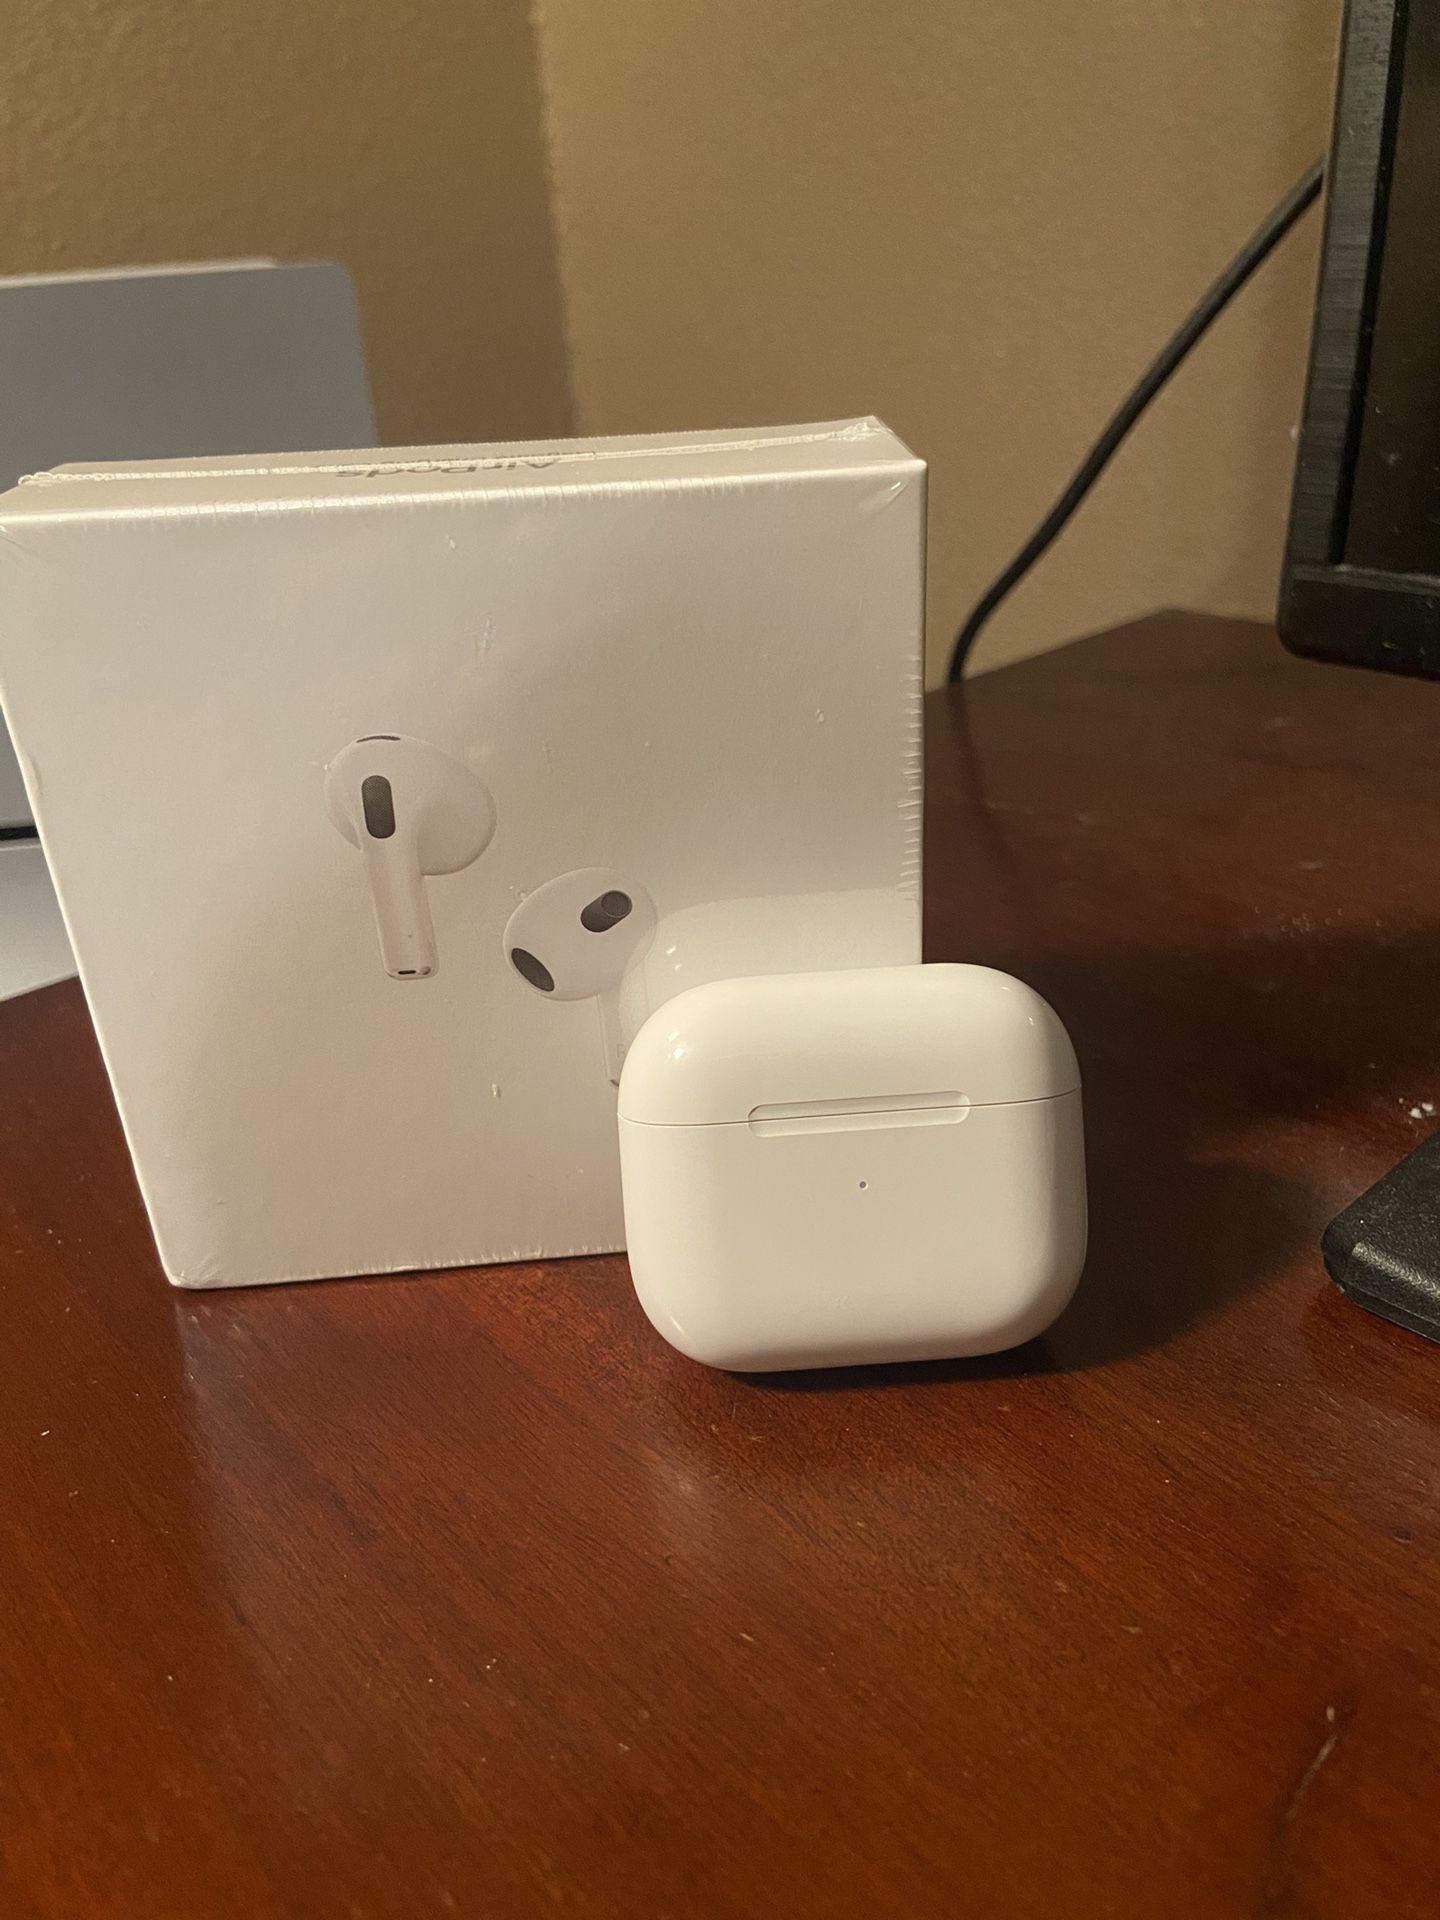 Apple Airpods 3rd Generation Bluetooth Earbuds Earphone +Charging Case White